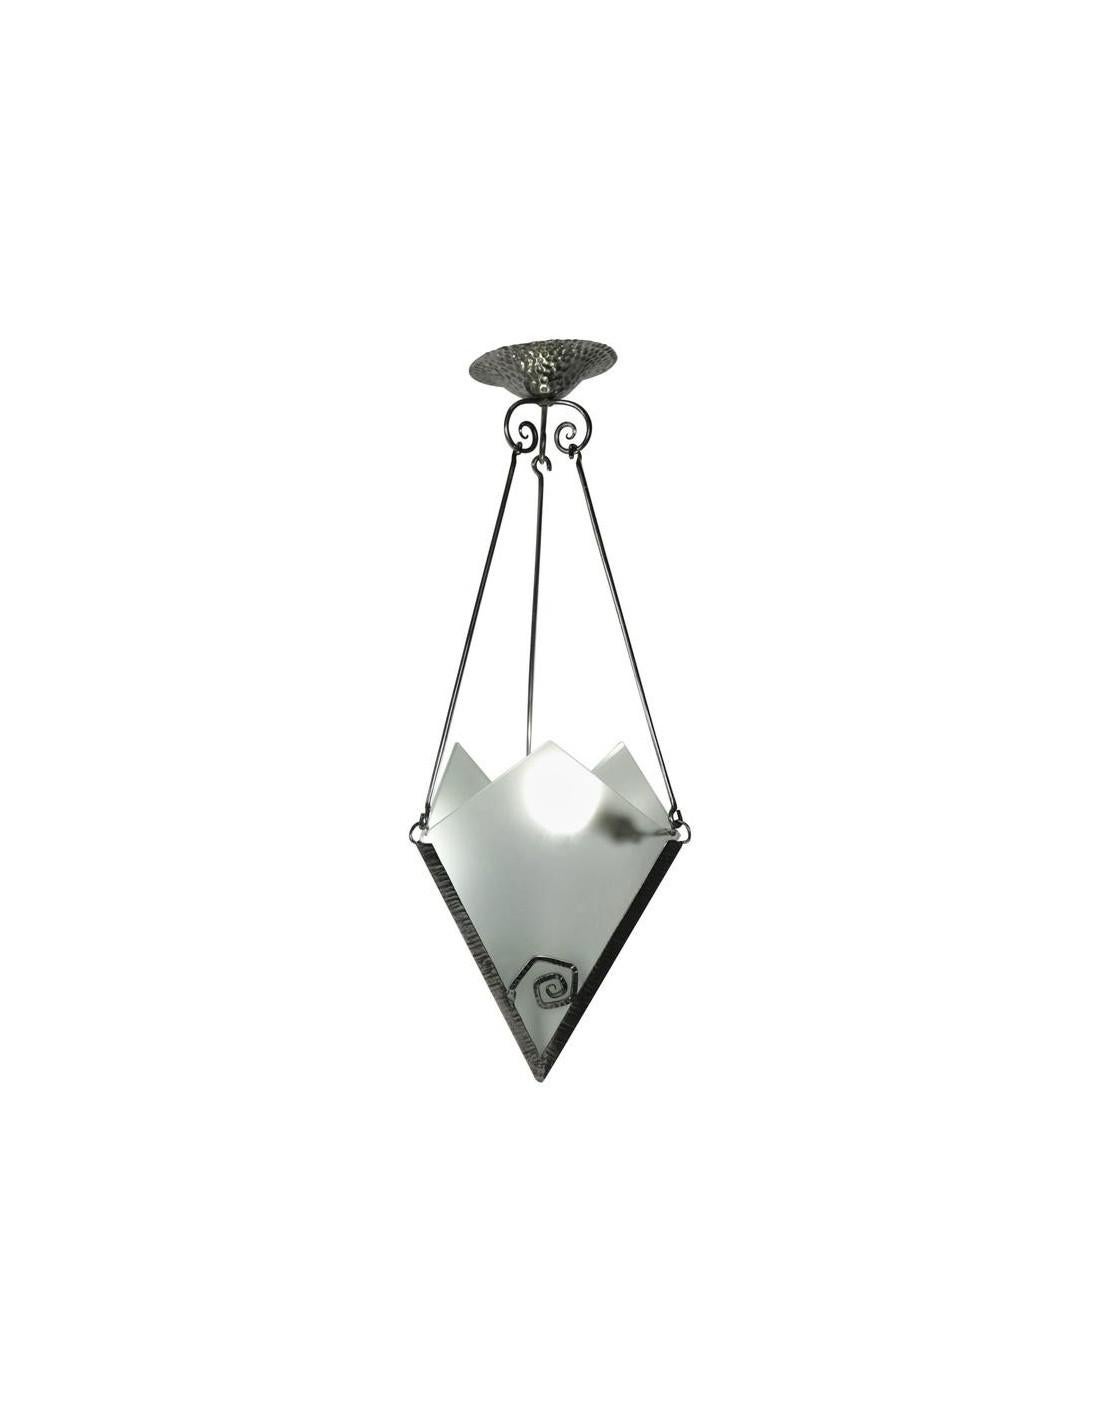 Mid-20th Century Pretty Small Art Deco Light Fixture in Etched Glass and Steel, circa 1930 For Sale